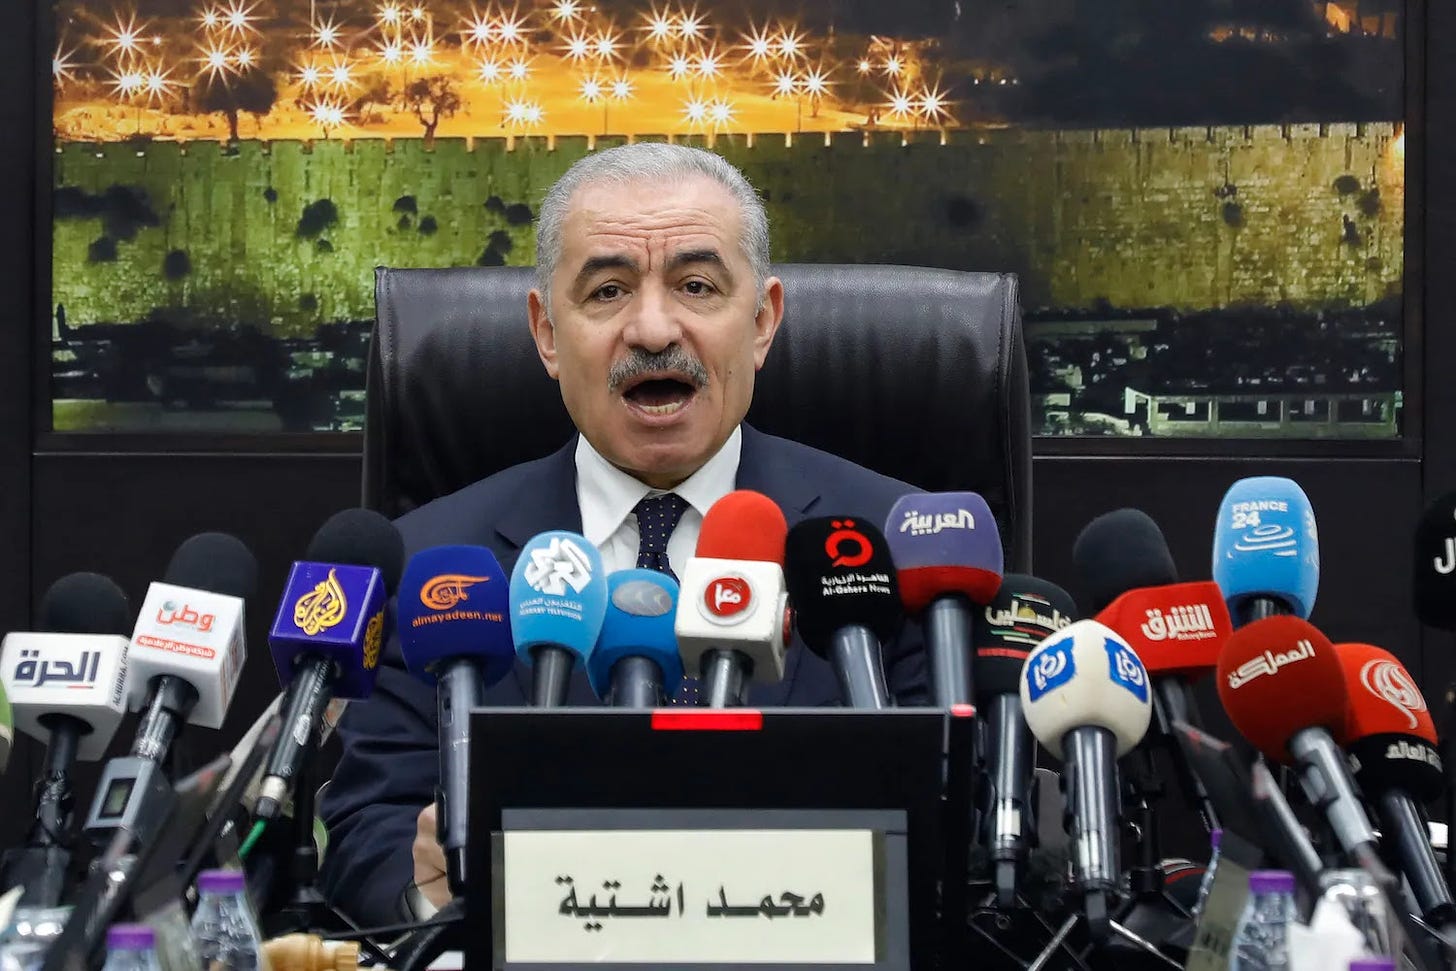 Palestinian Prime Minister Mohammad Shtayyeh announces his resignation in the West Bank.